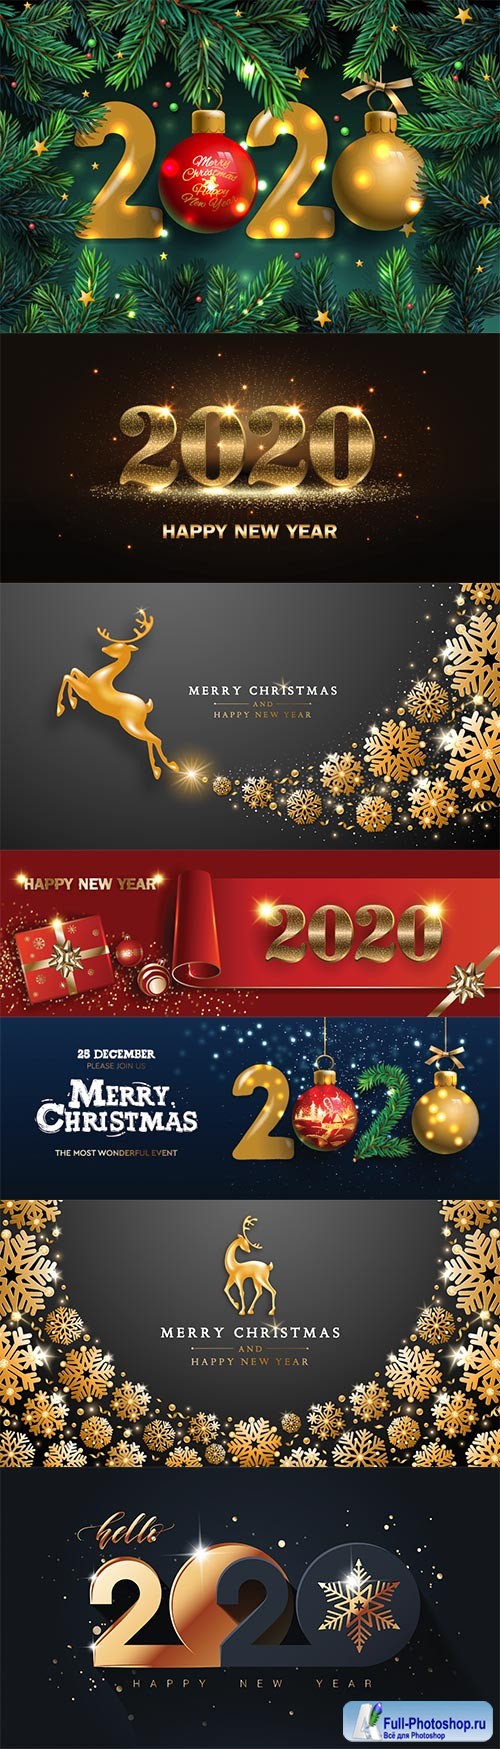 Happy New Year 2020 template, holiday vector